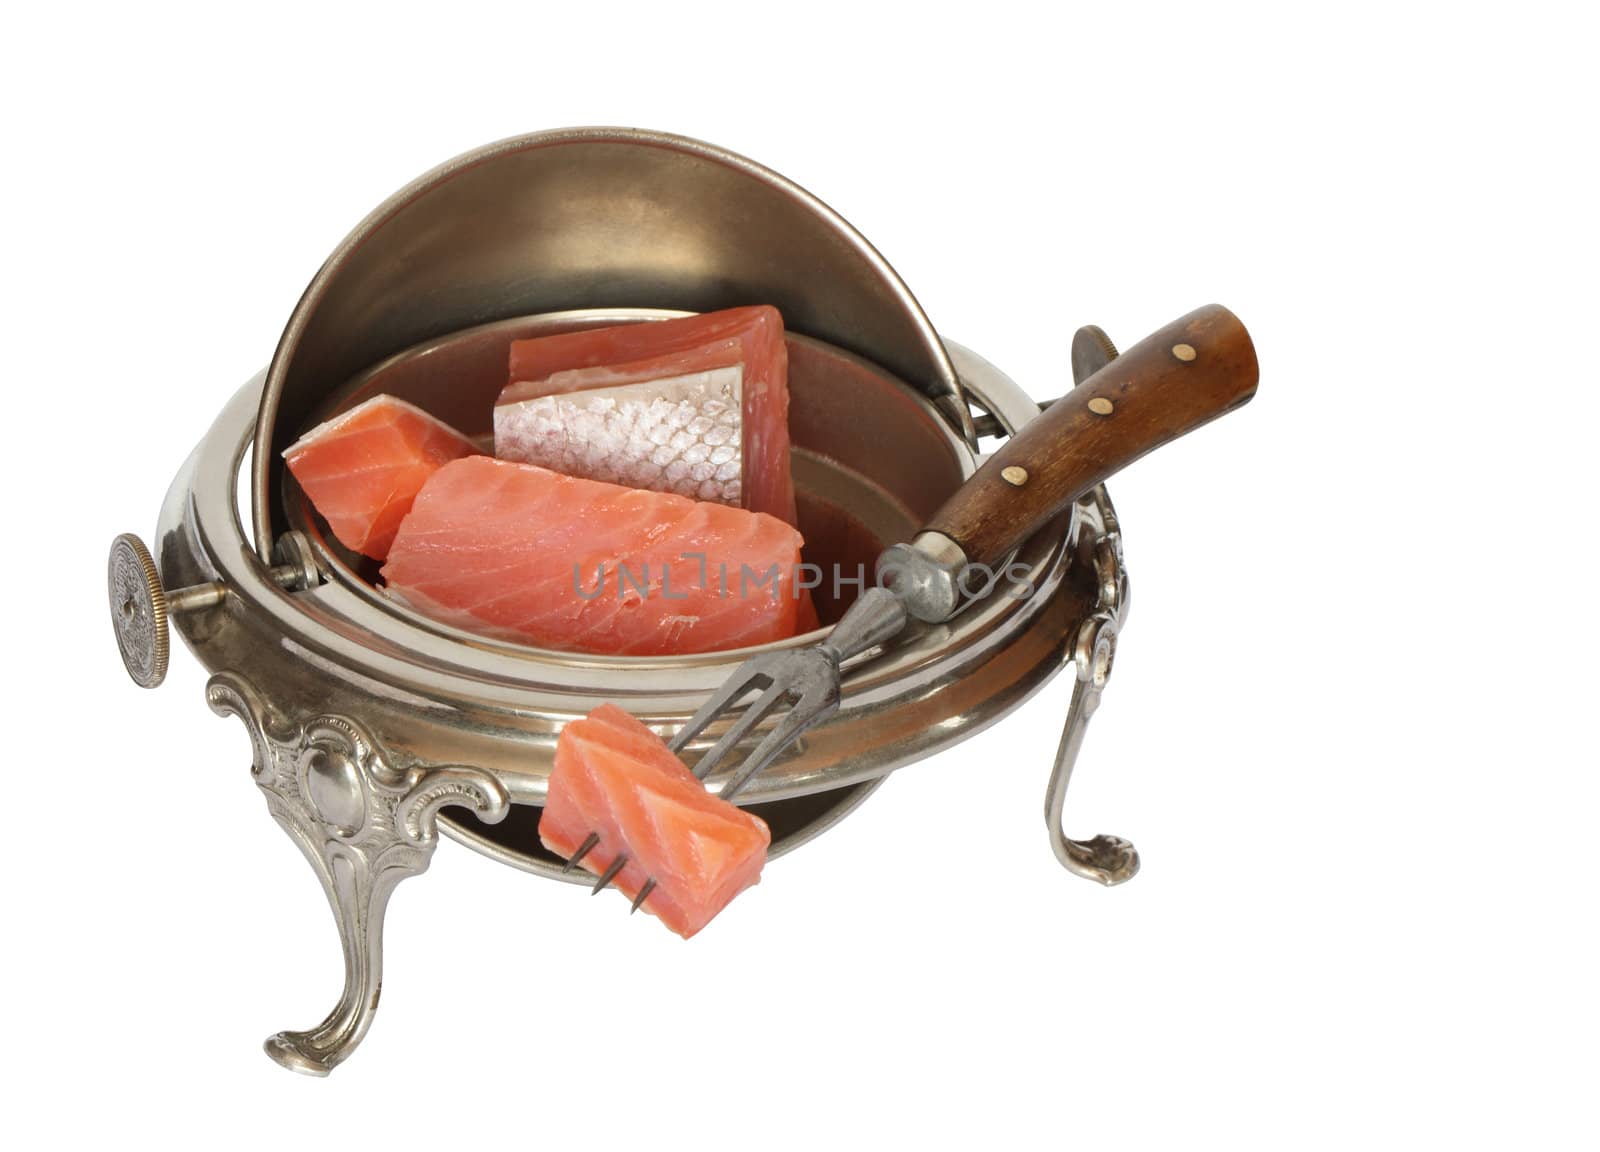 Few slices of salmon inside vintage metal dishware and old fork. Isolated on white background with clipping path